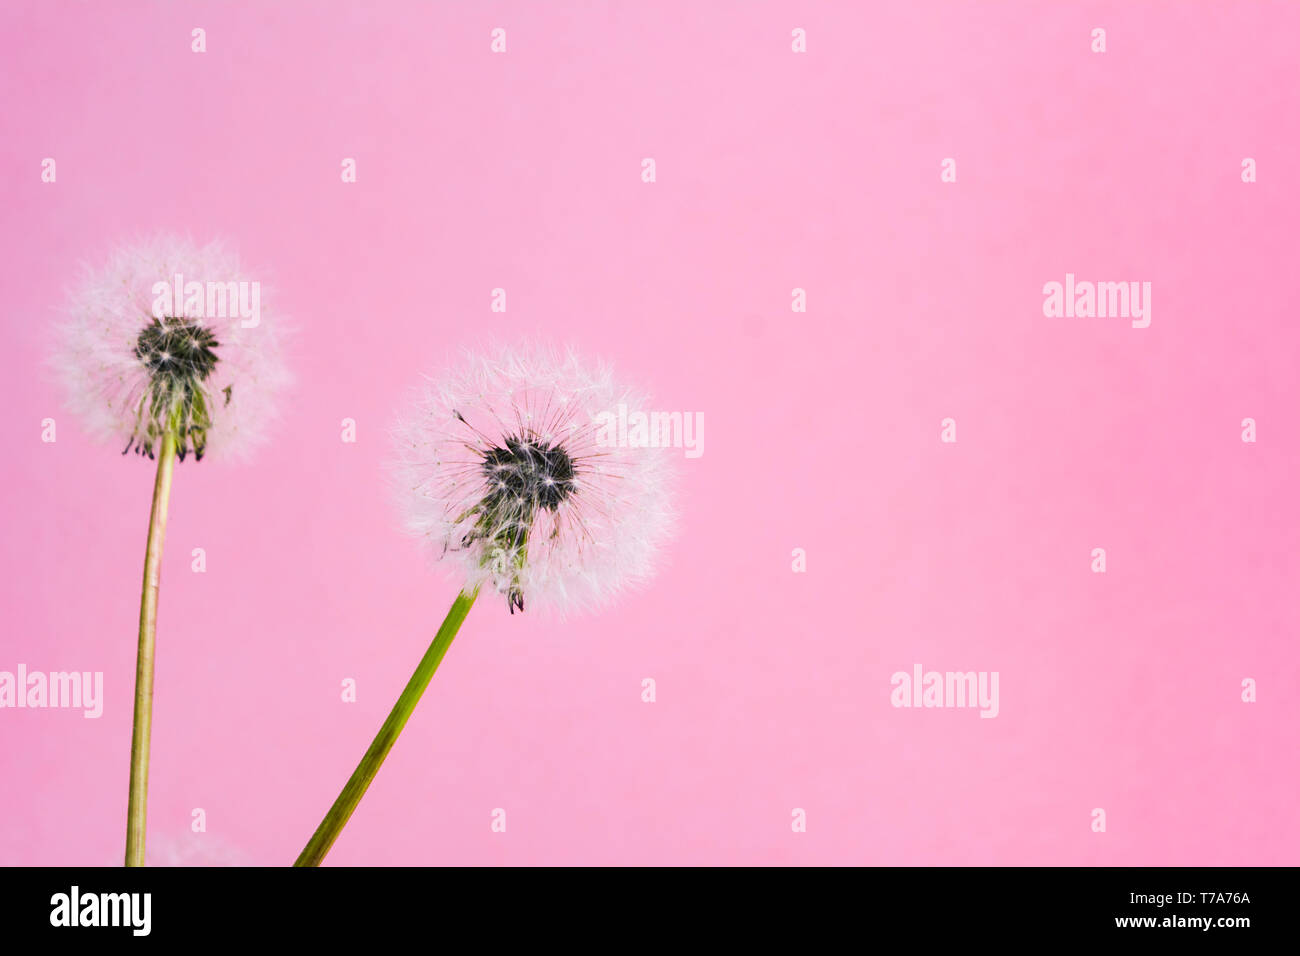 Dandelion flowers and seeds on pink background Stock Photo